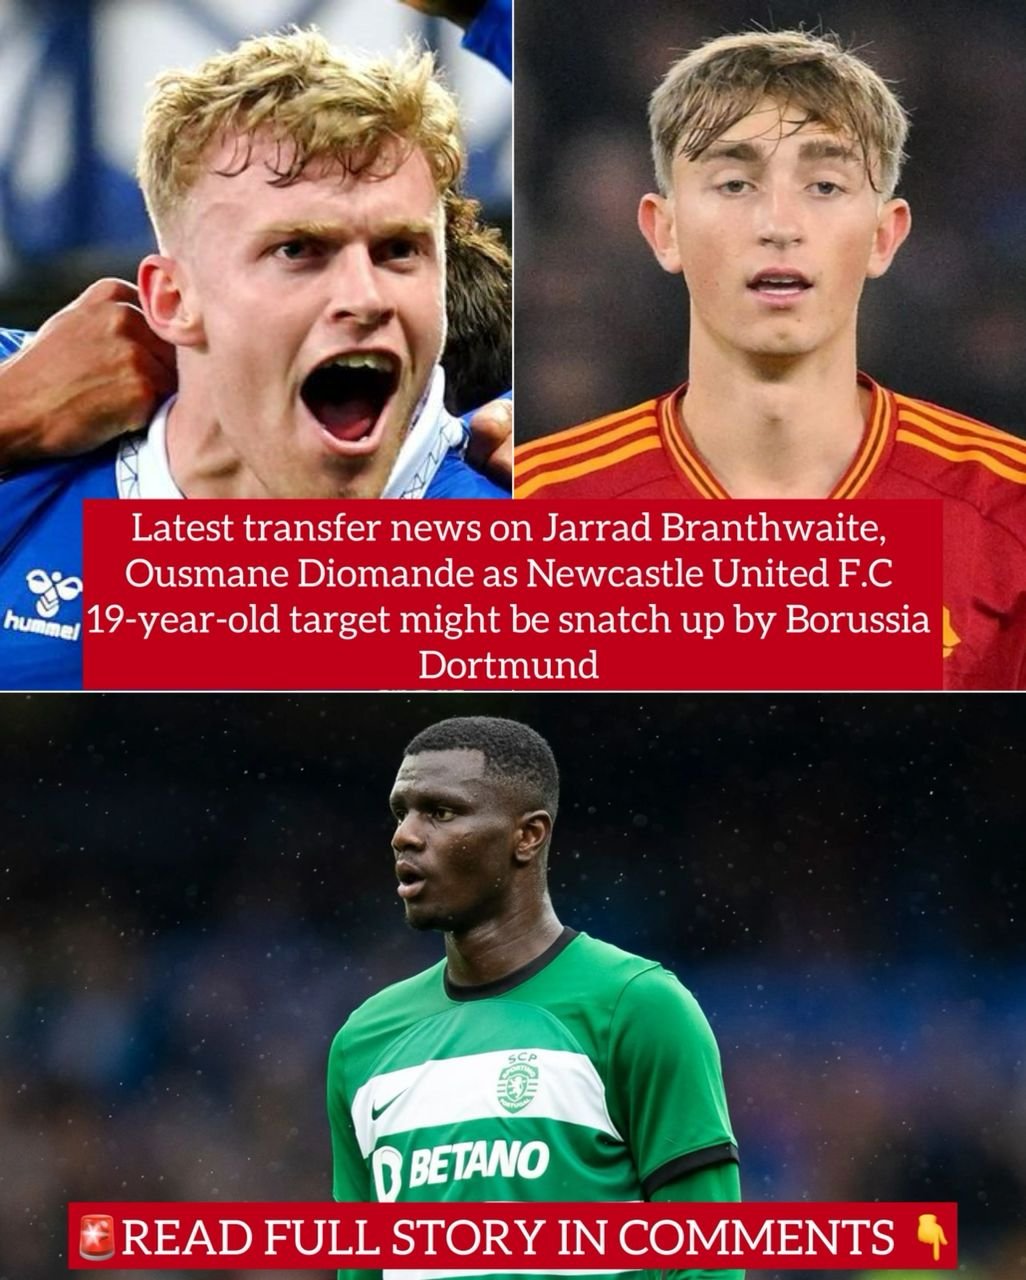 Latest transfer news on Jarrad Branthwaite, Ousmane Diomande as Newcastle United F.C 19-year-old target might be snatch up by Borussia Dortmund